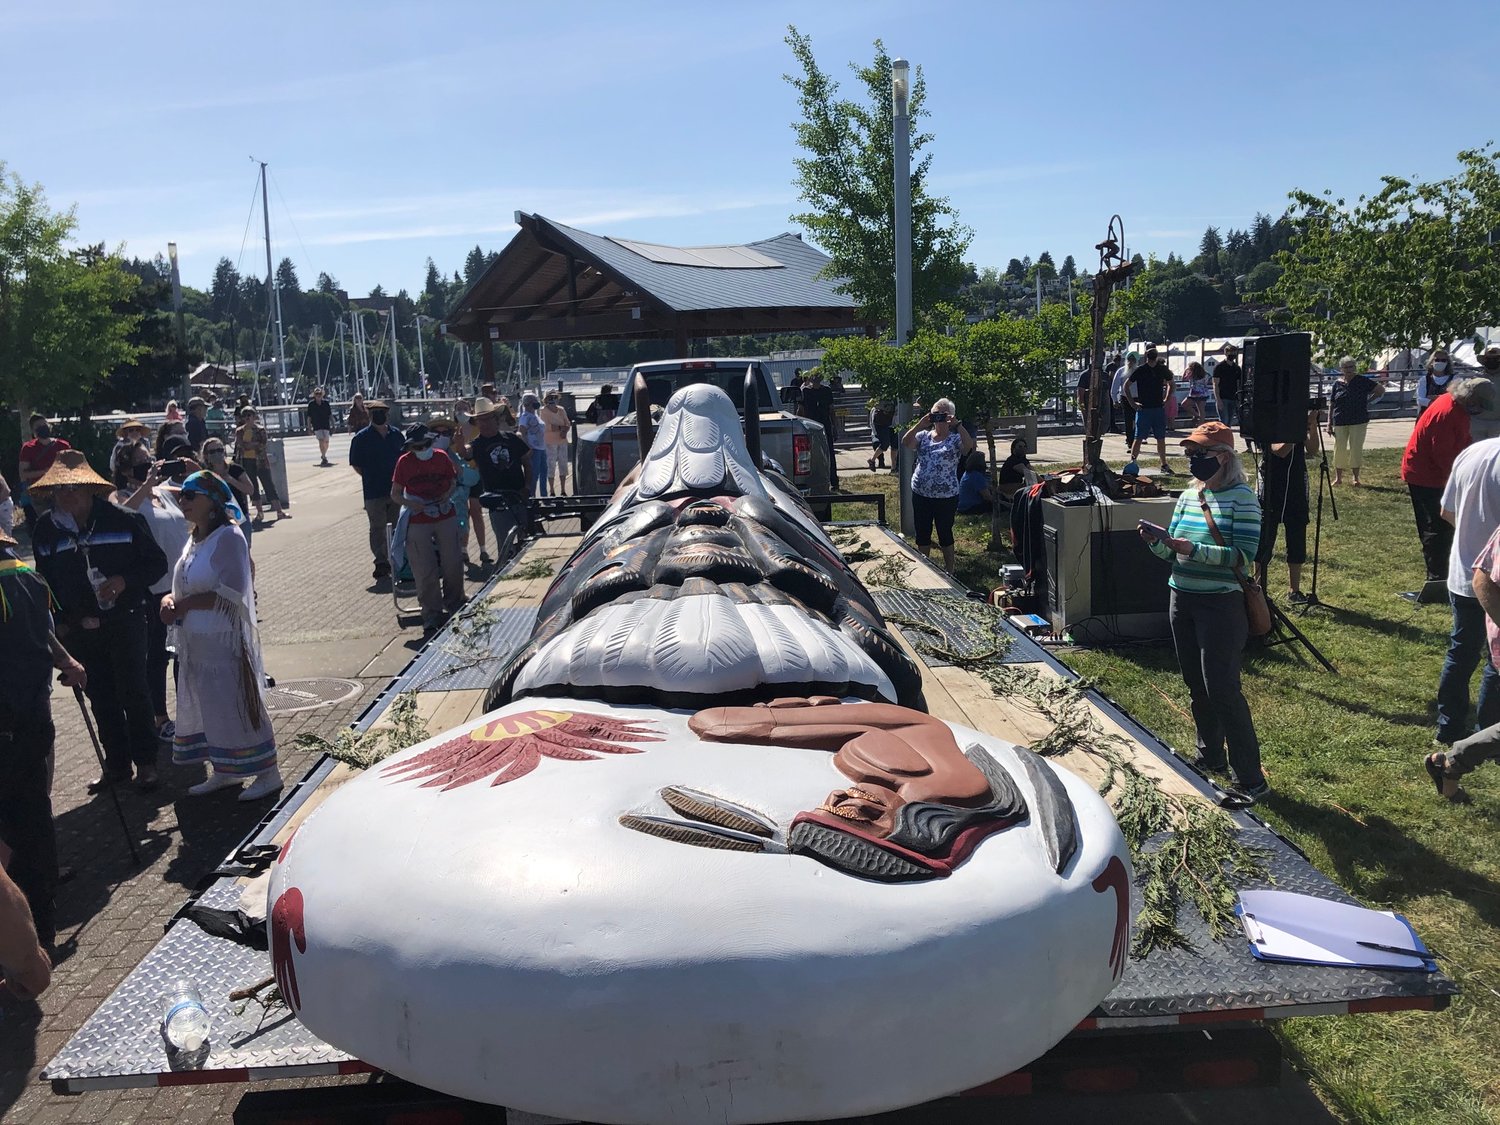 This is a view of the new totem pole from its top end, taken at Percival Landing in Olympia, May 15, 2021.